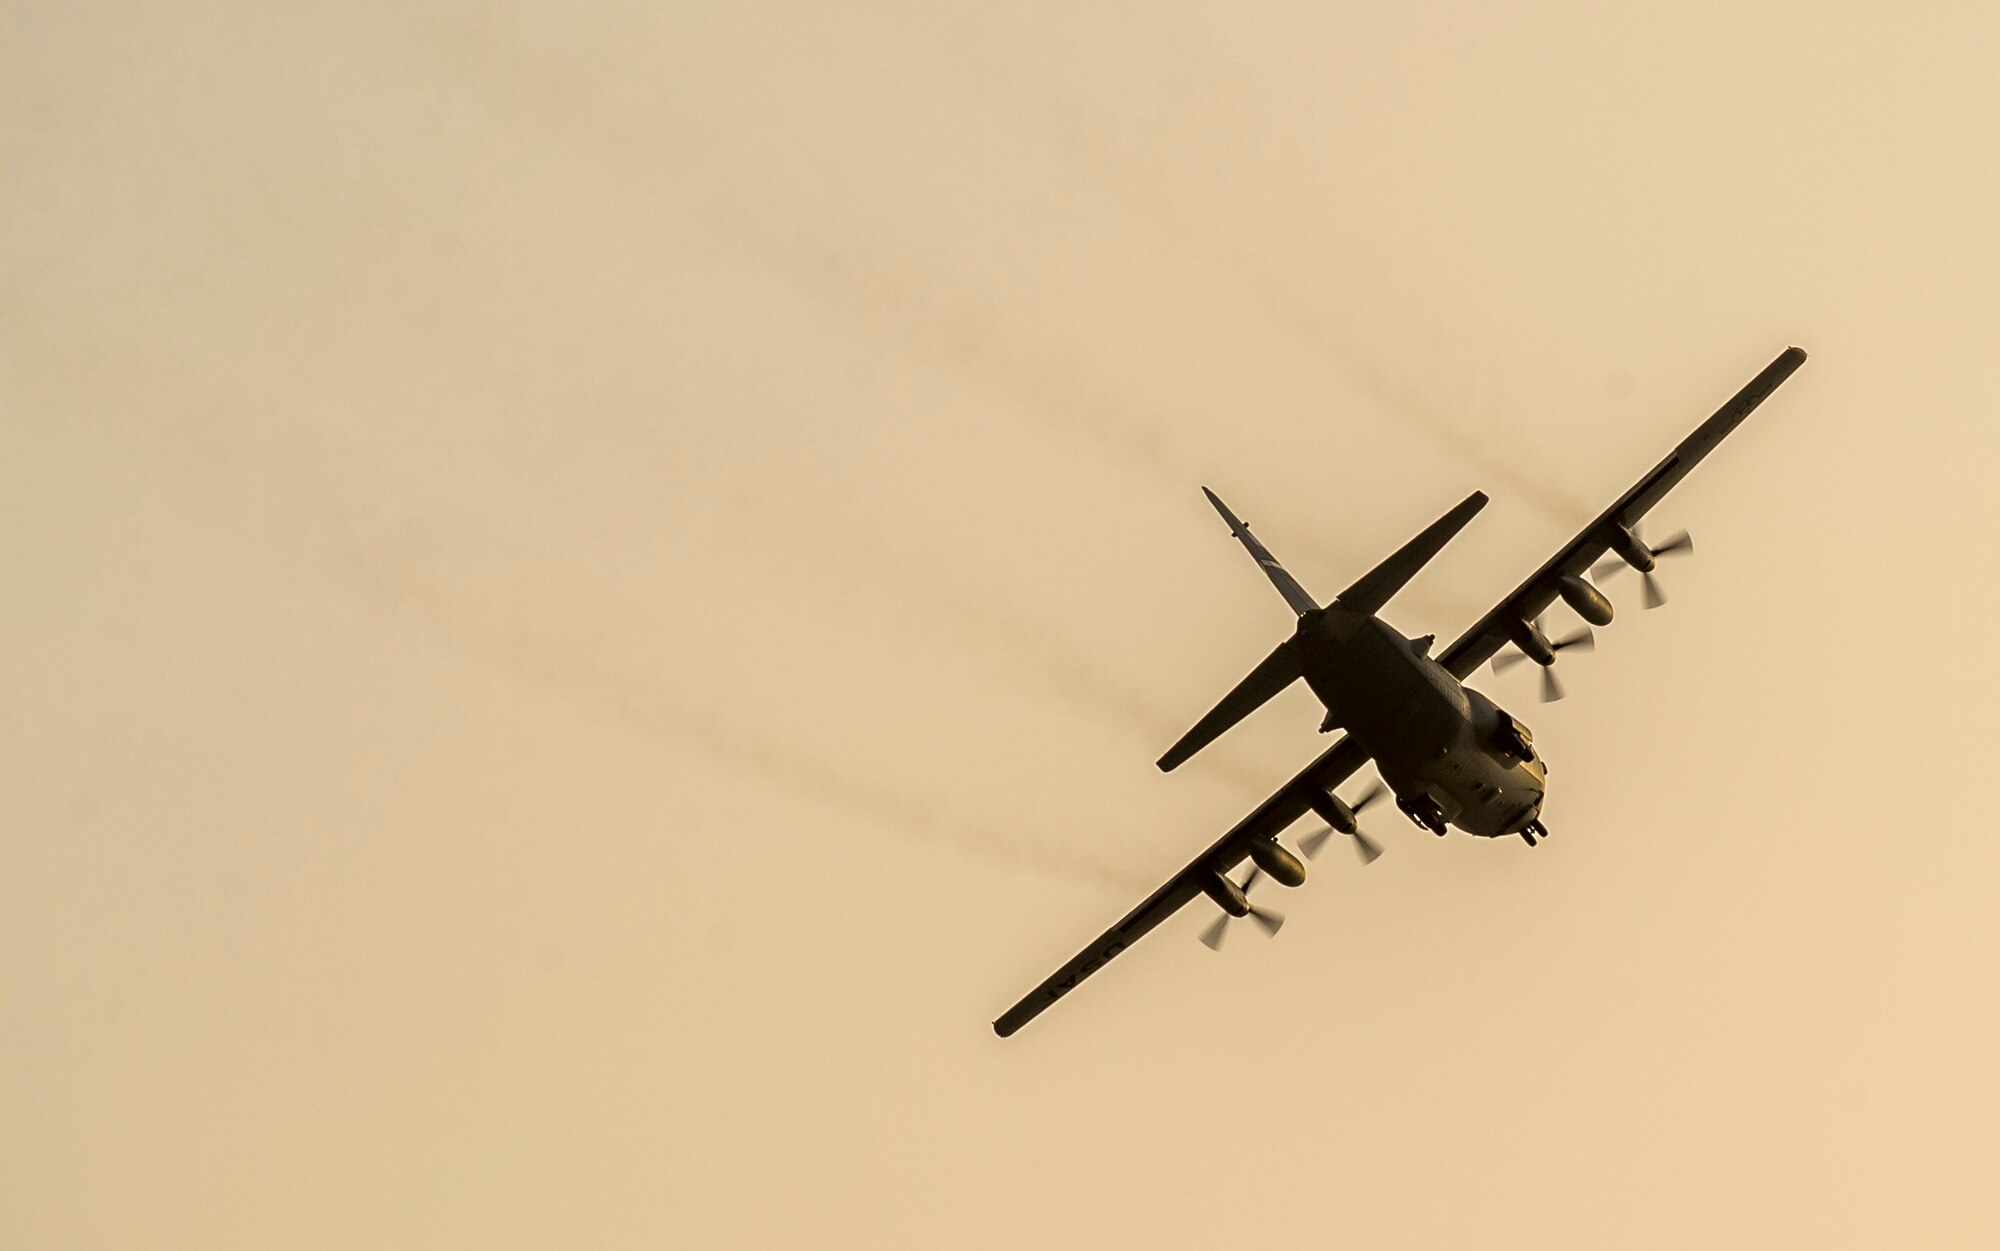 A C-130H Hercules from the 934th Air Wing flies overhead before landing at its new home Sept. 12, 2014 at an undisclosed location in Southwest Asia. The crew will be stationed with the 386th Air Expeditionary Wing for the next four months and deployed from Minneapolis-St Paul Air Reserve Station, Minn. in support of Operation Enduring Freedom. (U.S. Air Force photo by Staff Sgt. Jeremy Bowcock)